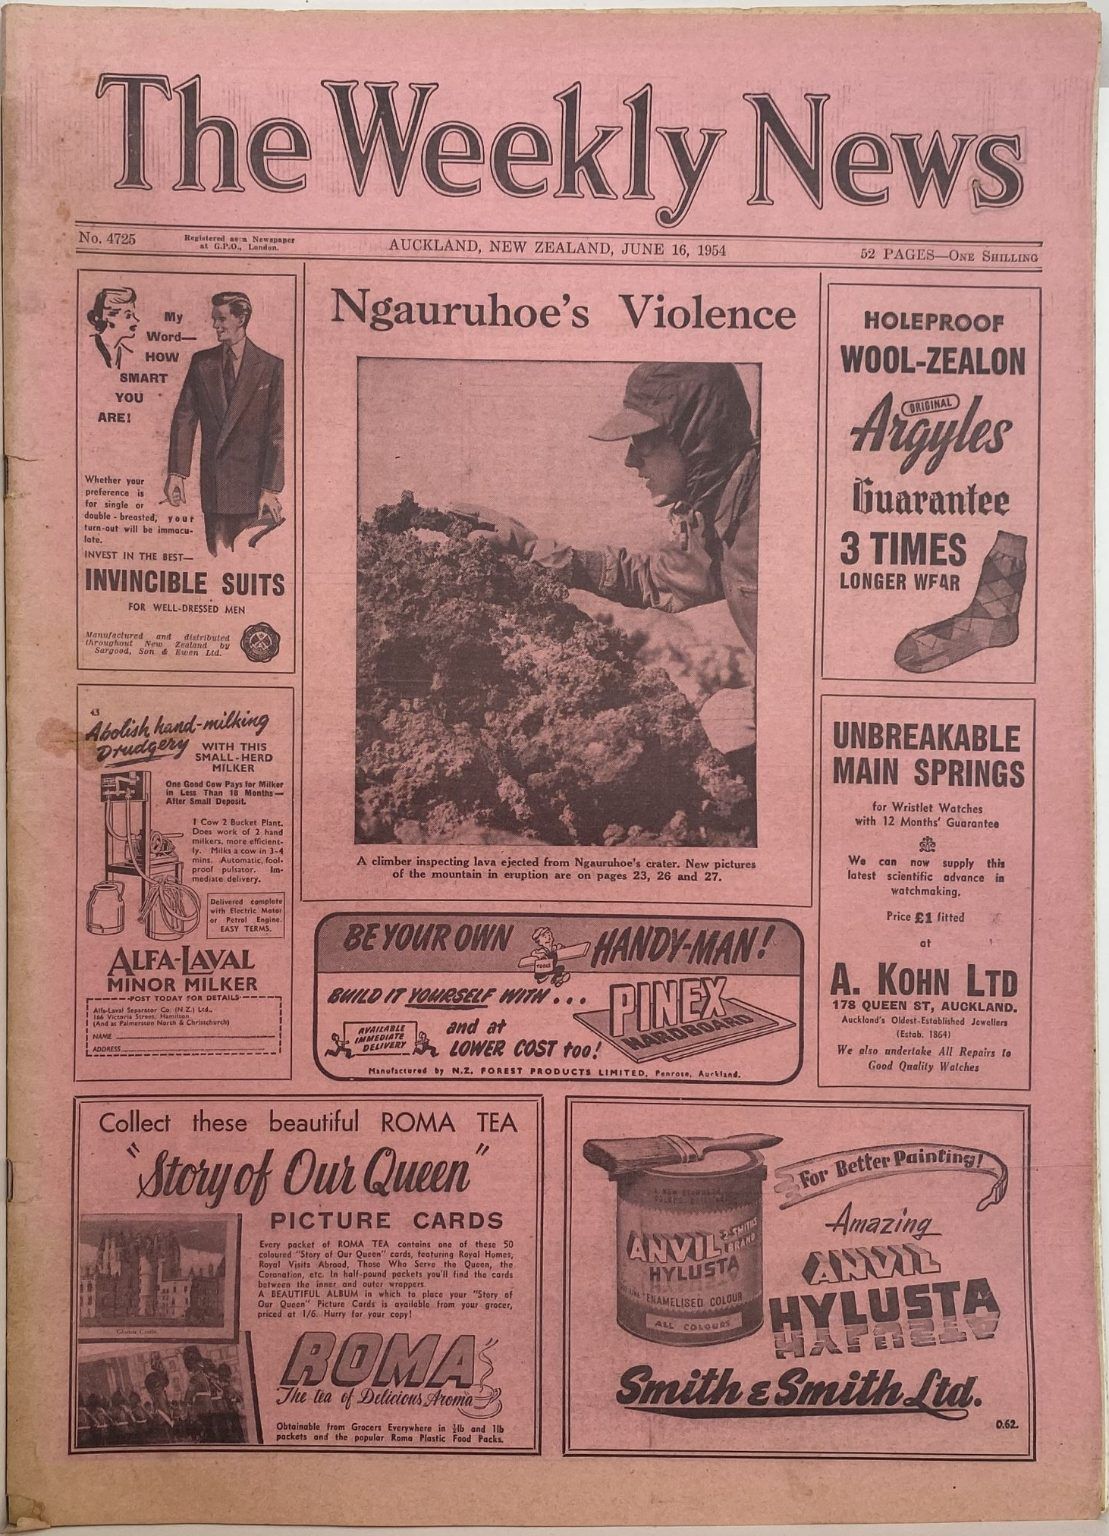 OLD NEWSPAPER: The Weekly News - No. 4725, 16 June 1954